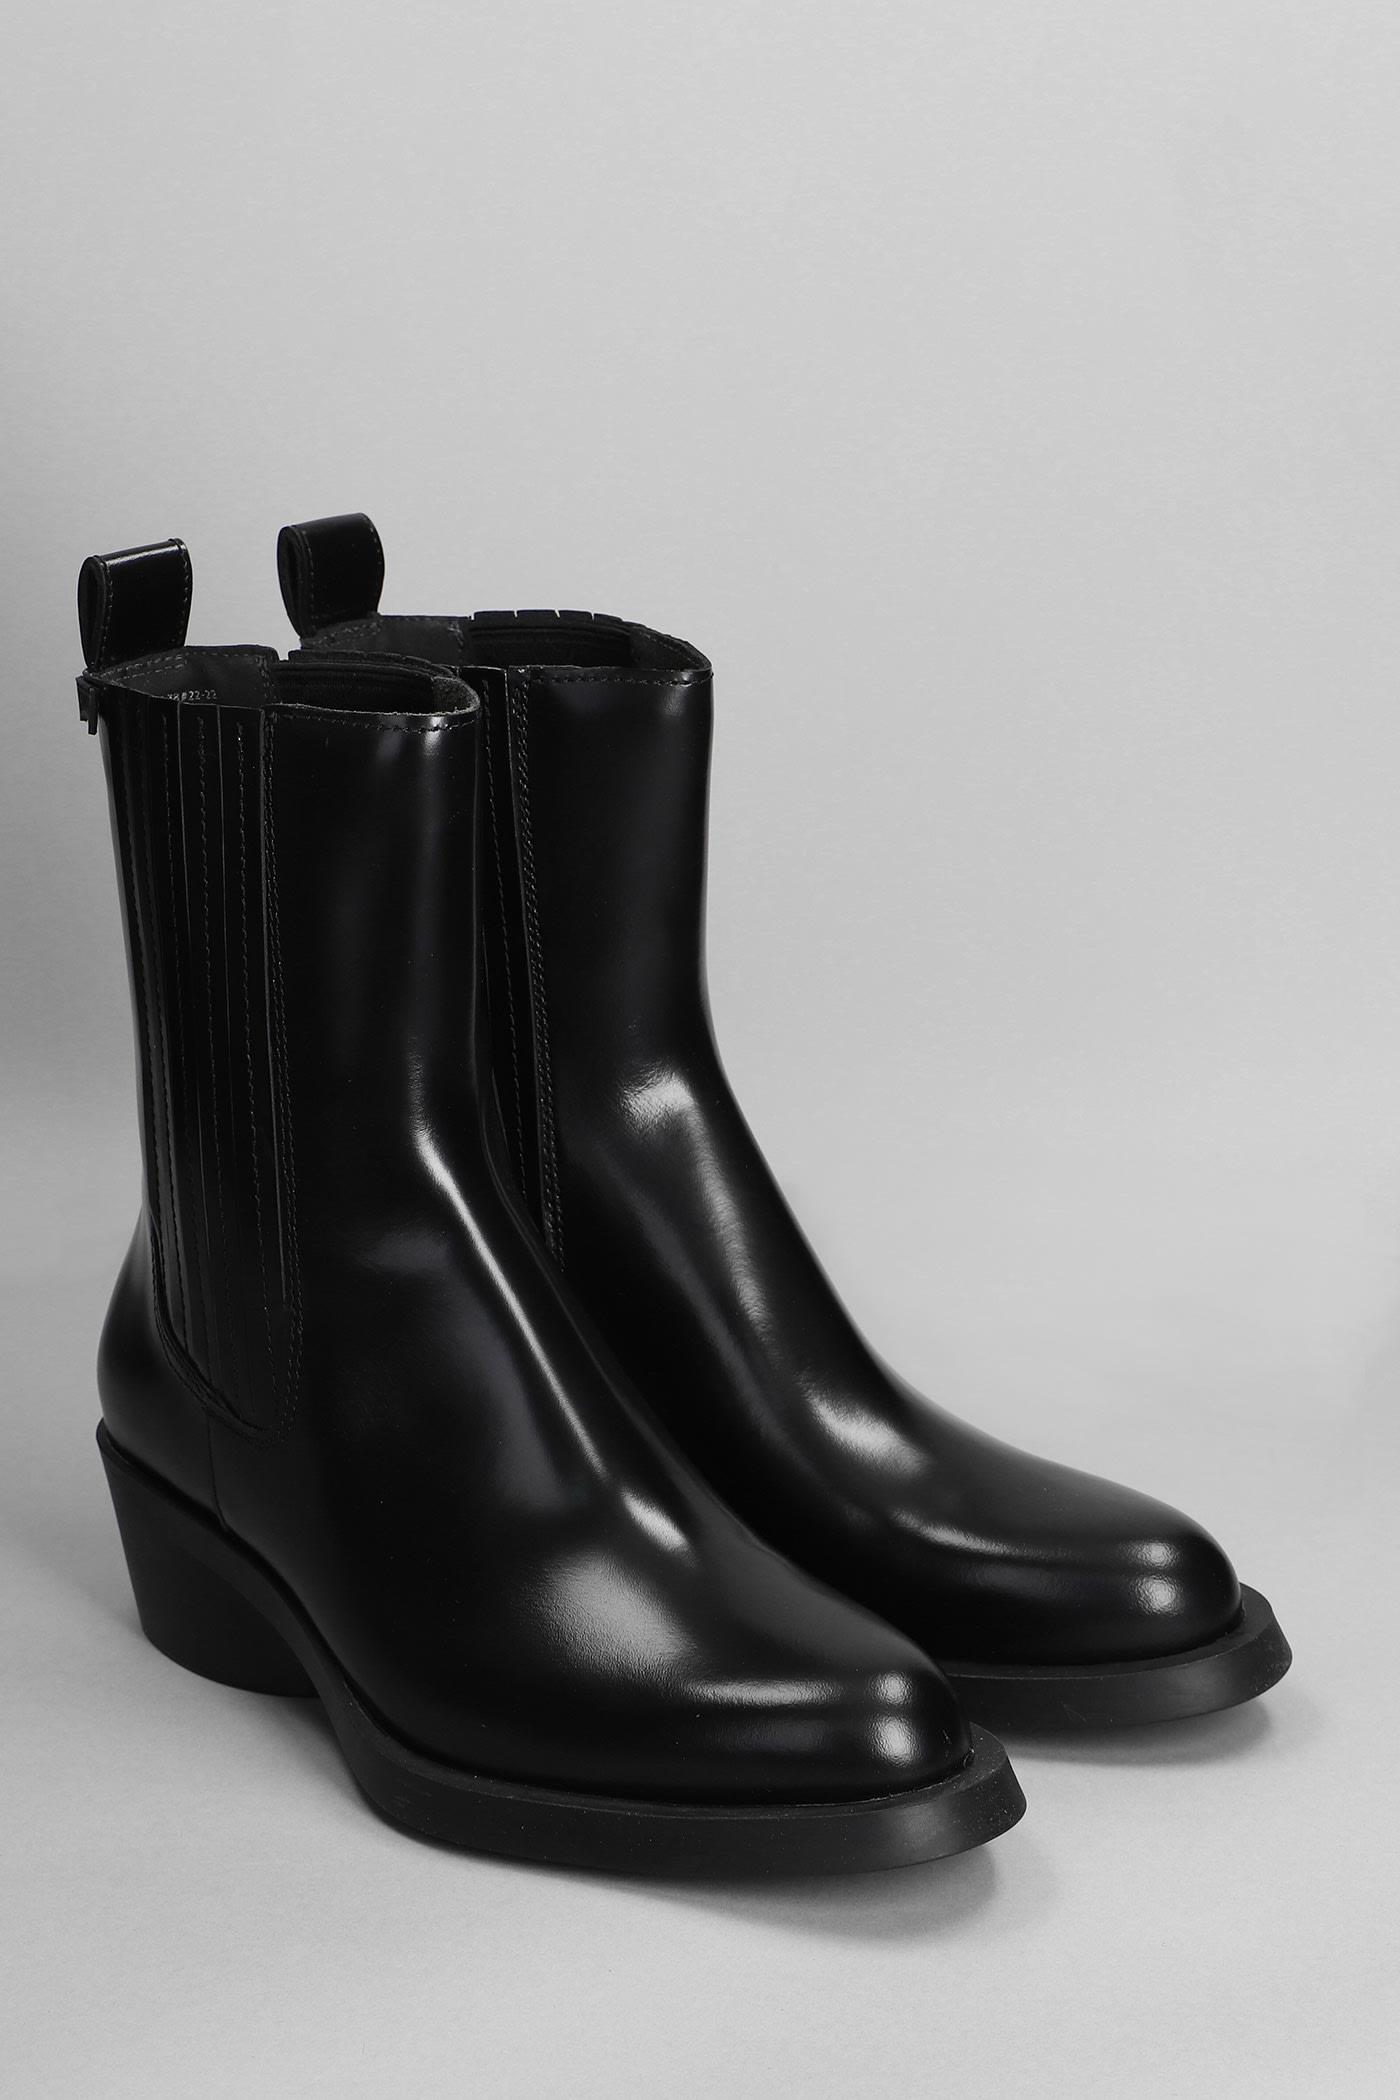 Camper Bonnie Texan Ankle Boots In Black Leather | Lyst